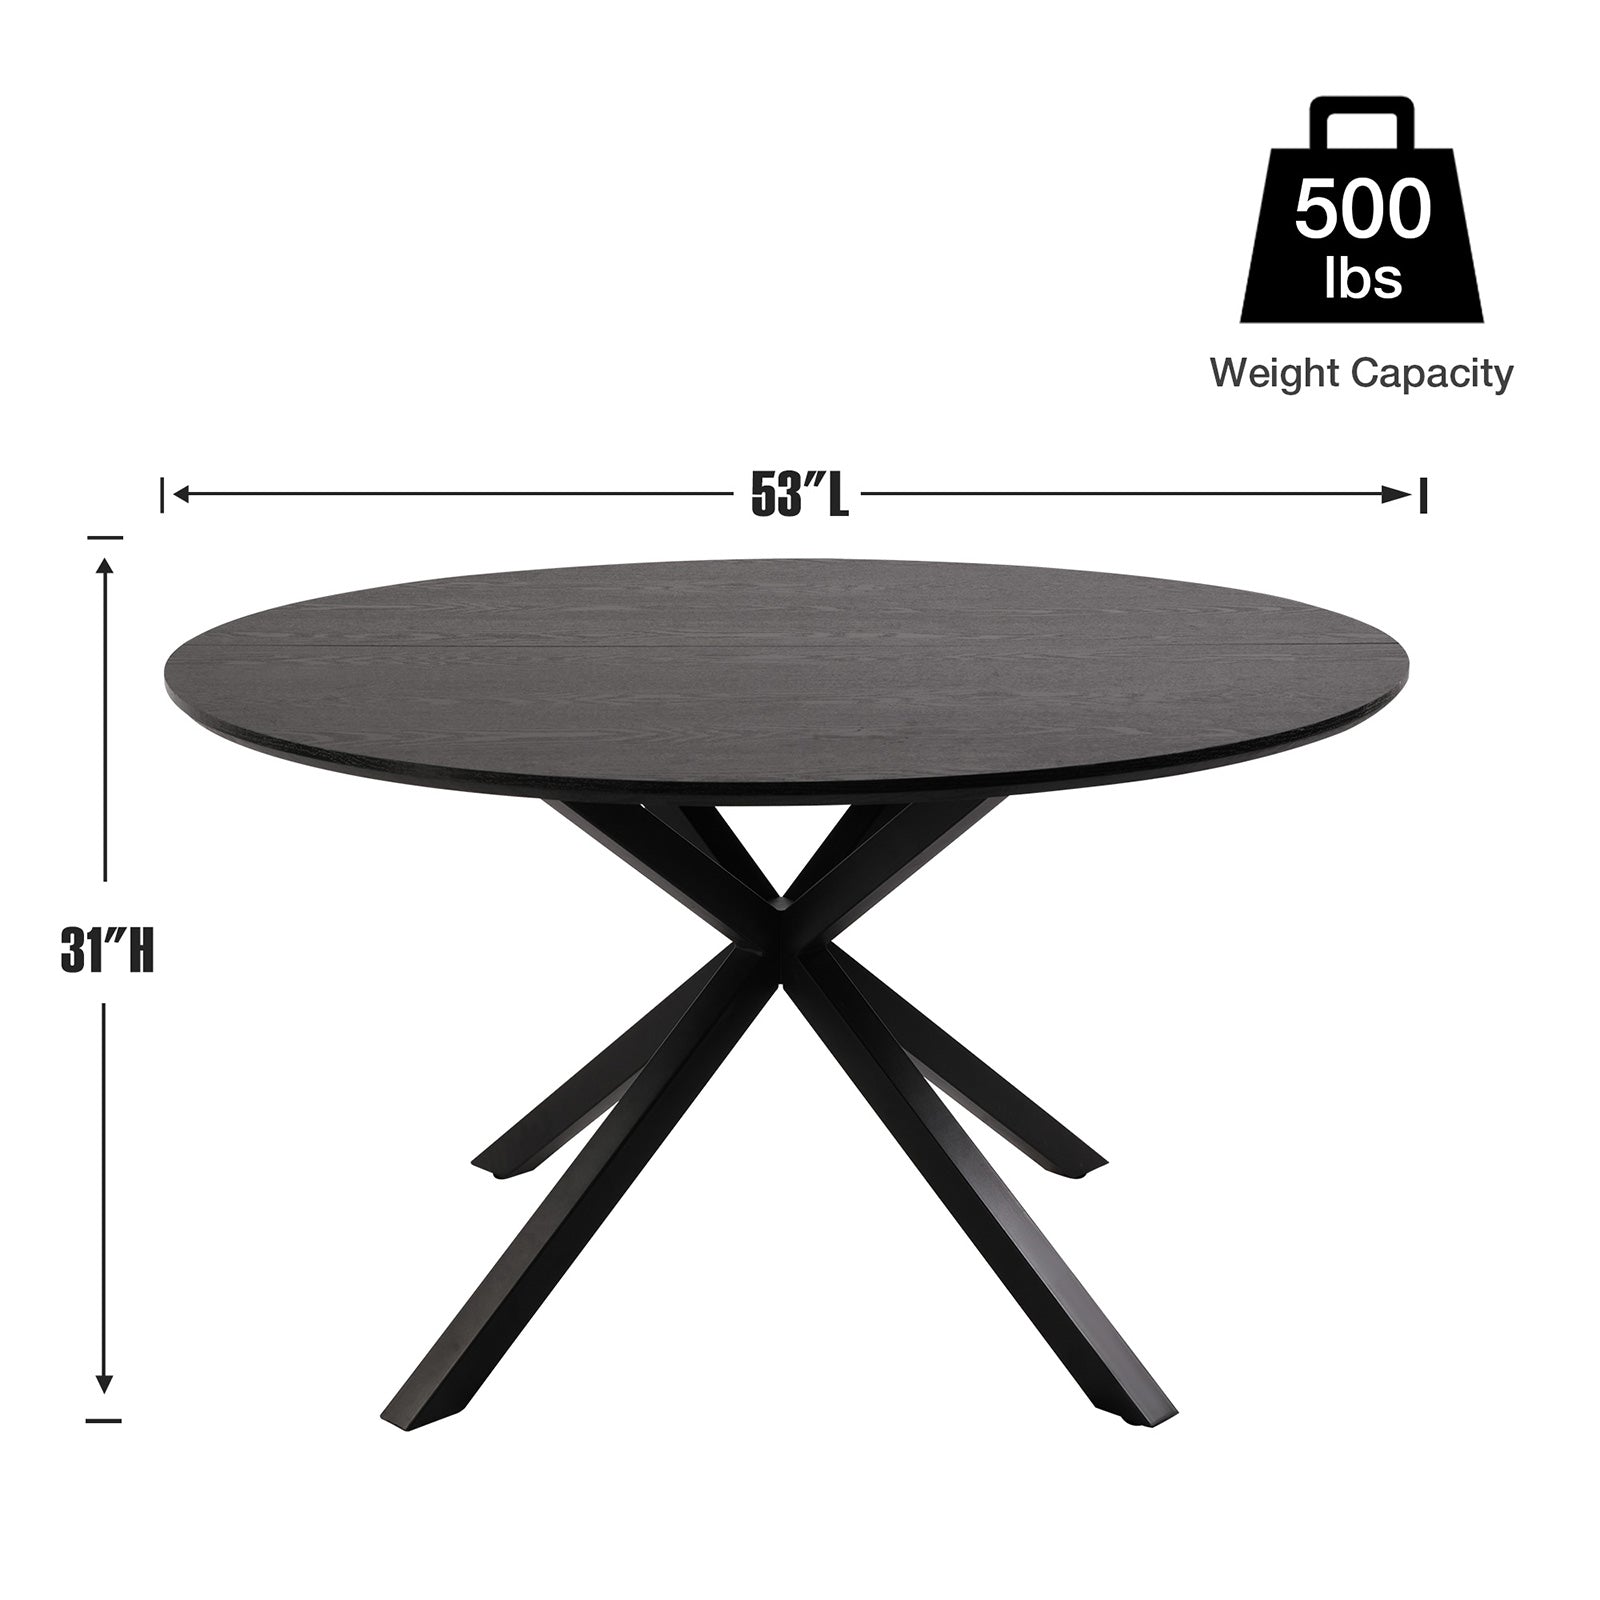 53" Mid-Century Modern Round Dining Room Table for 4-6 Person W/Solid Metal Legs, Black Wood Grain